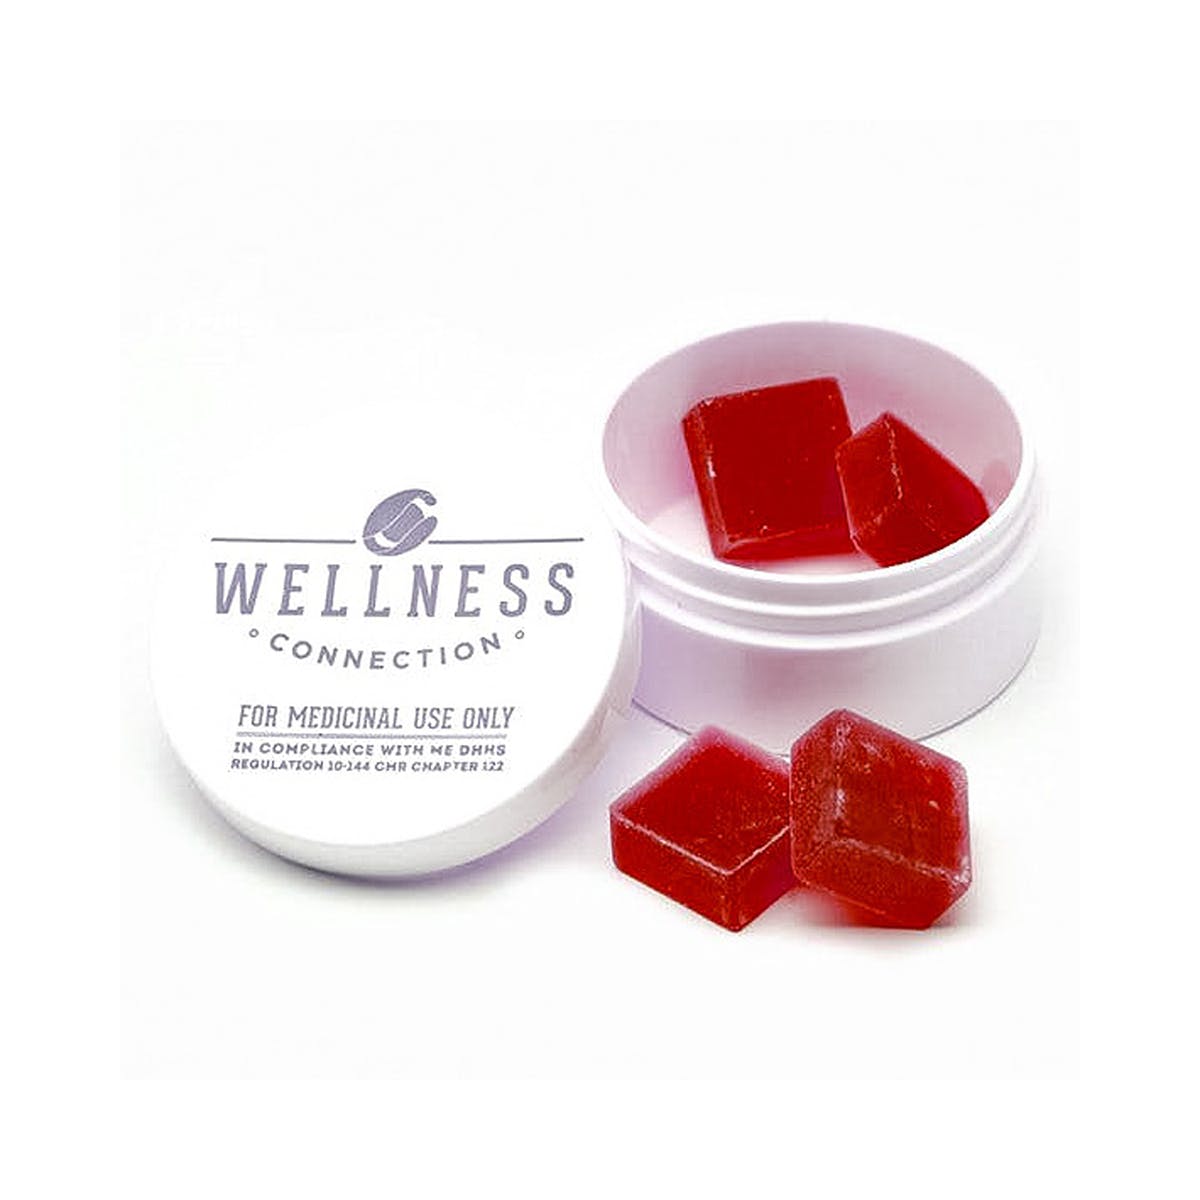 edible-wellness-connection-strawberry-soft-candy